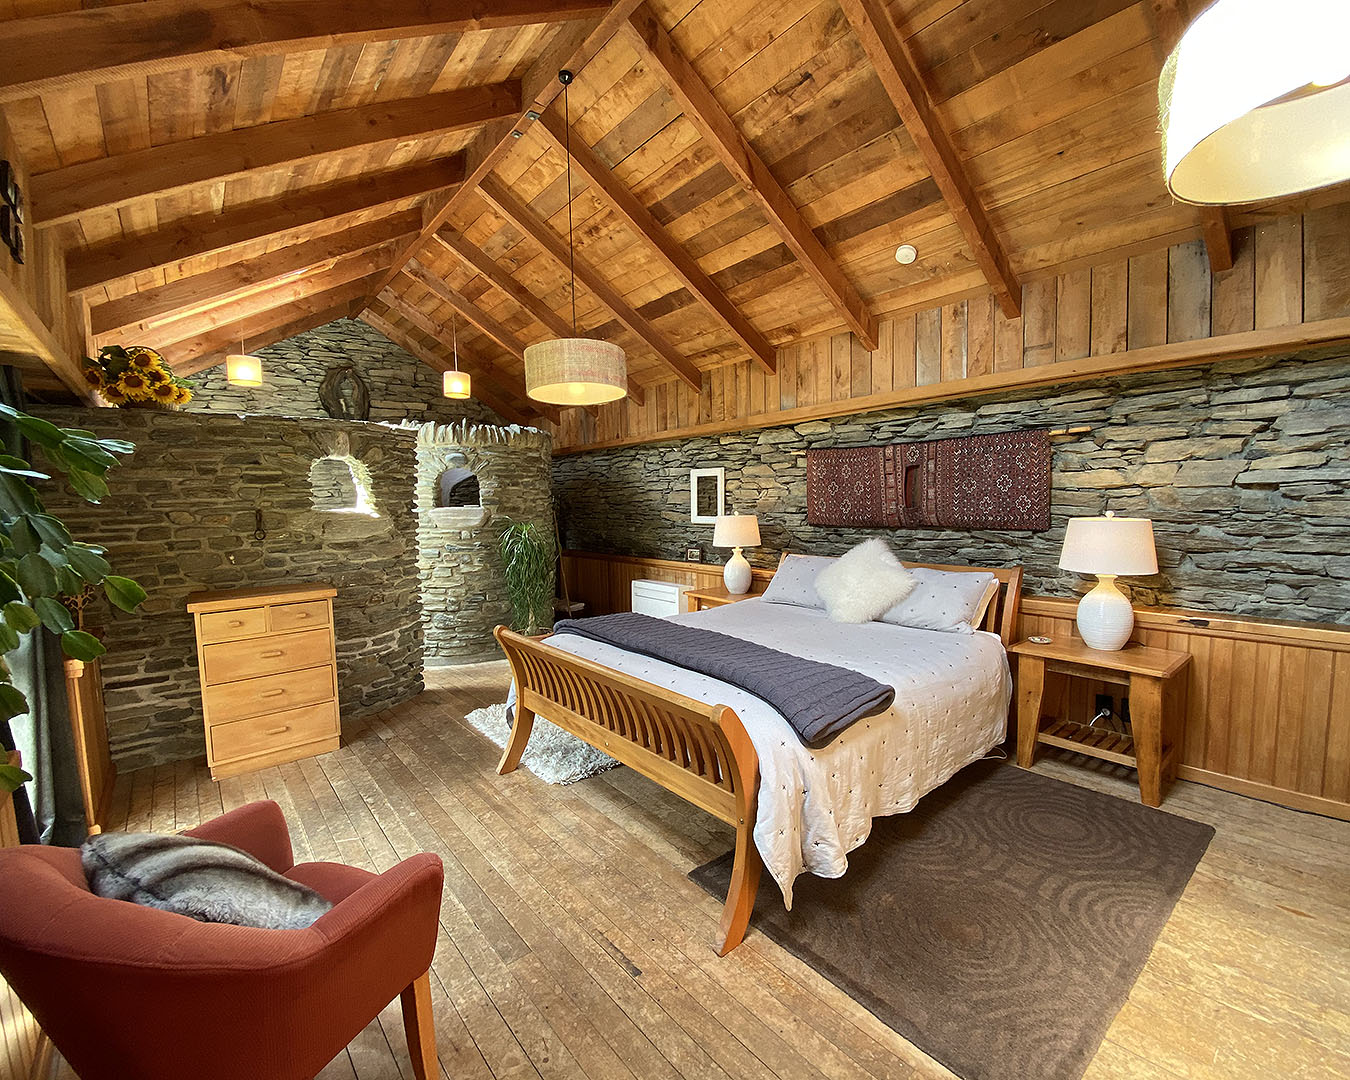 A gorgeous room with a bathroom hidden behind a curved stone wall behind.